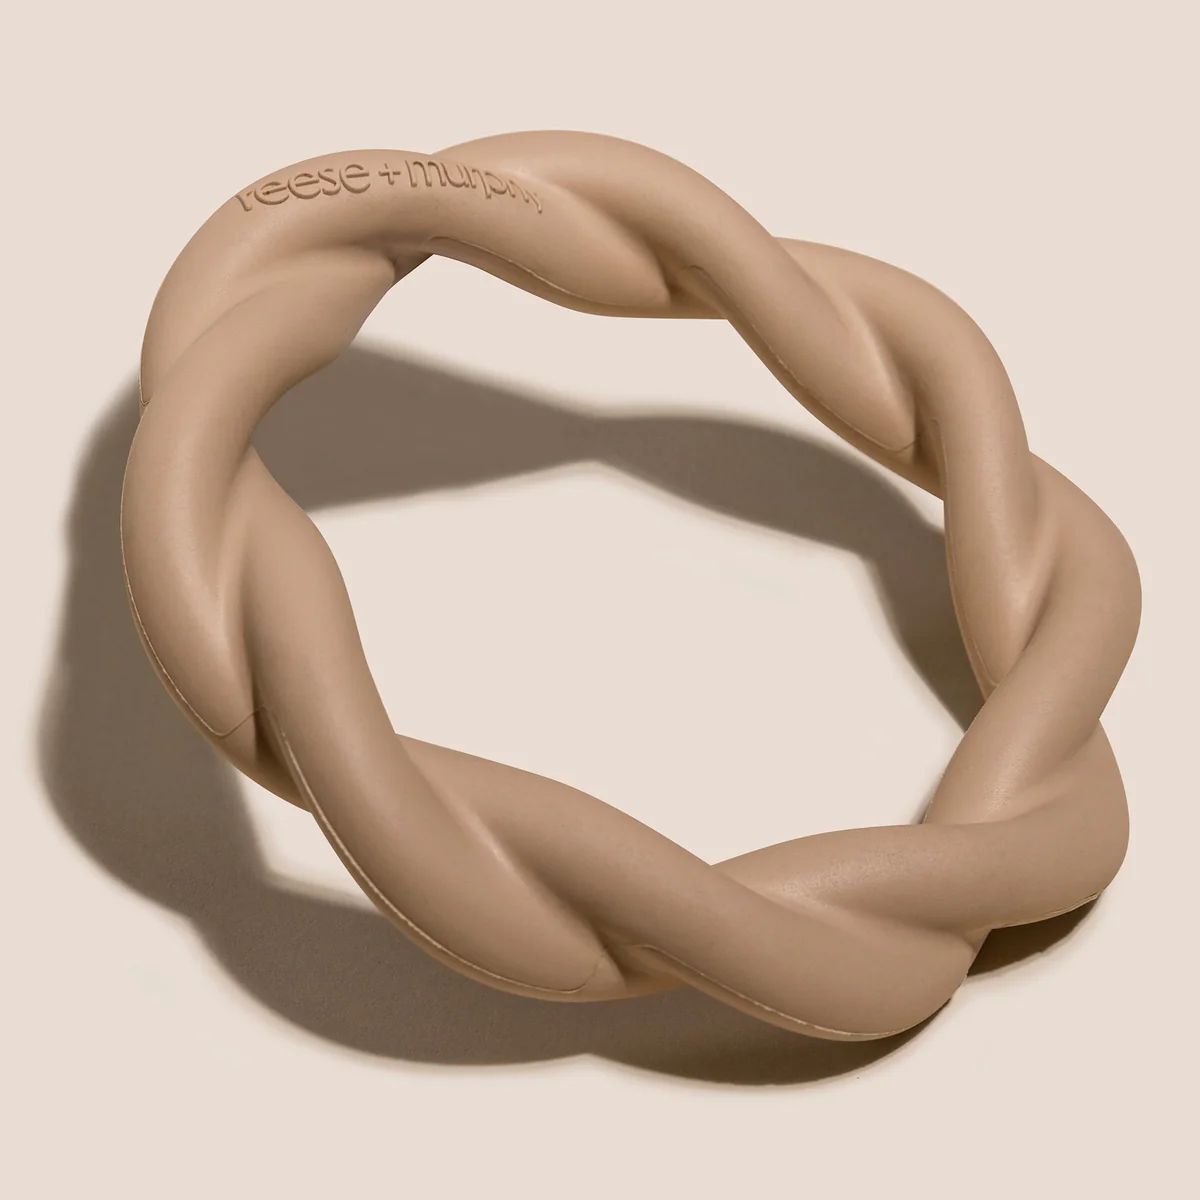 Twisted Ring Chew Toy | Reese + Murphy LLC